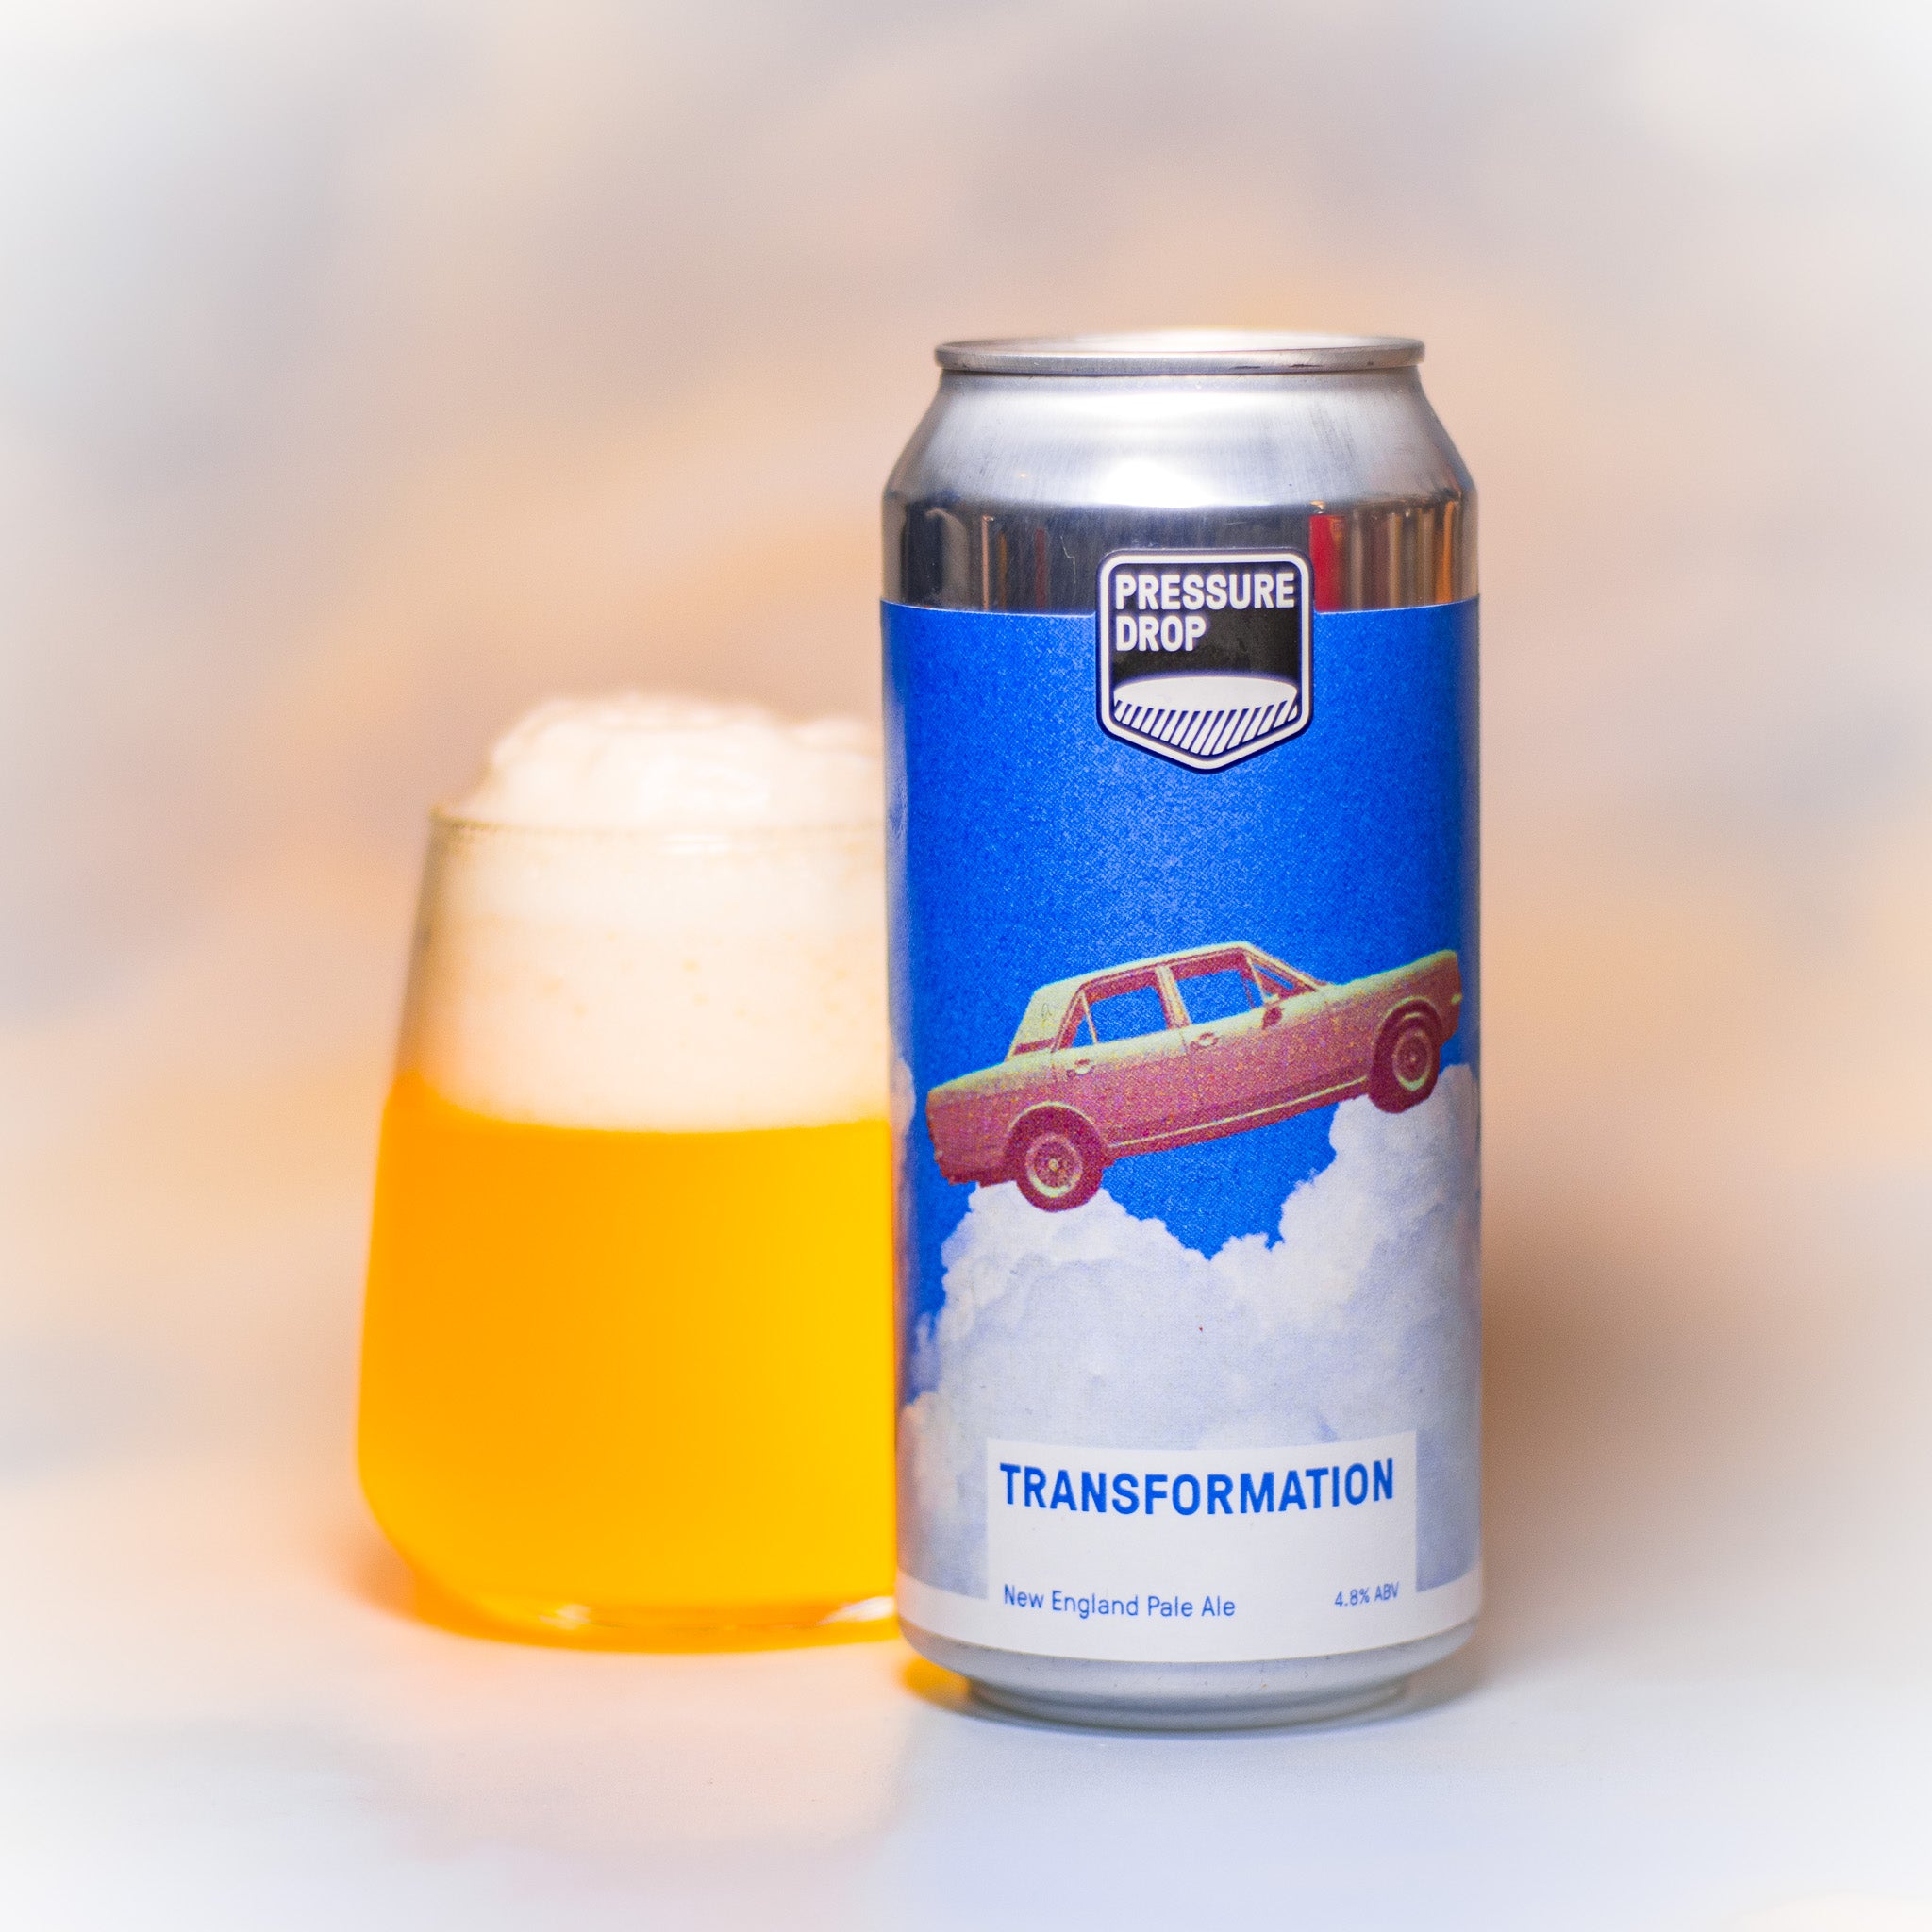 Transformation 4.8% New England Pale Ale